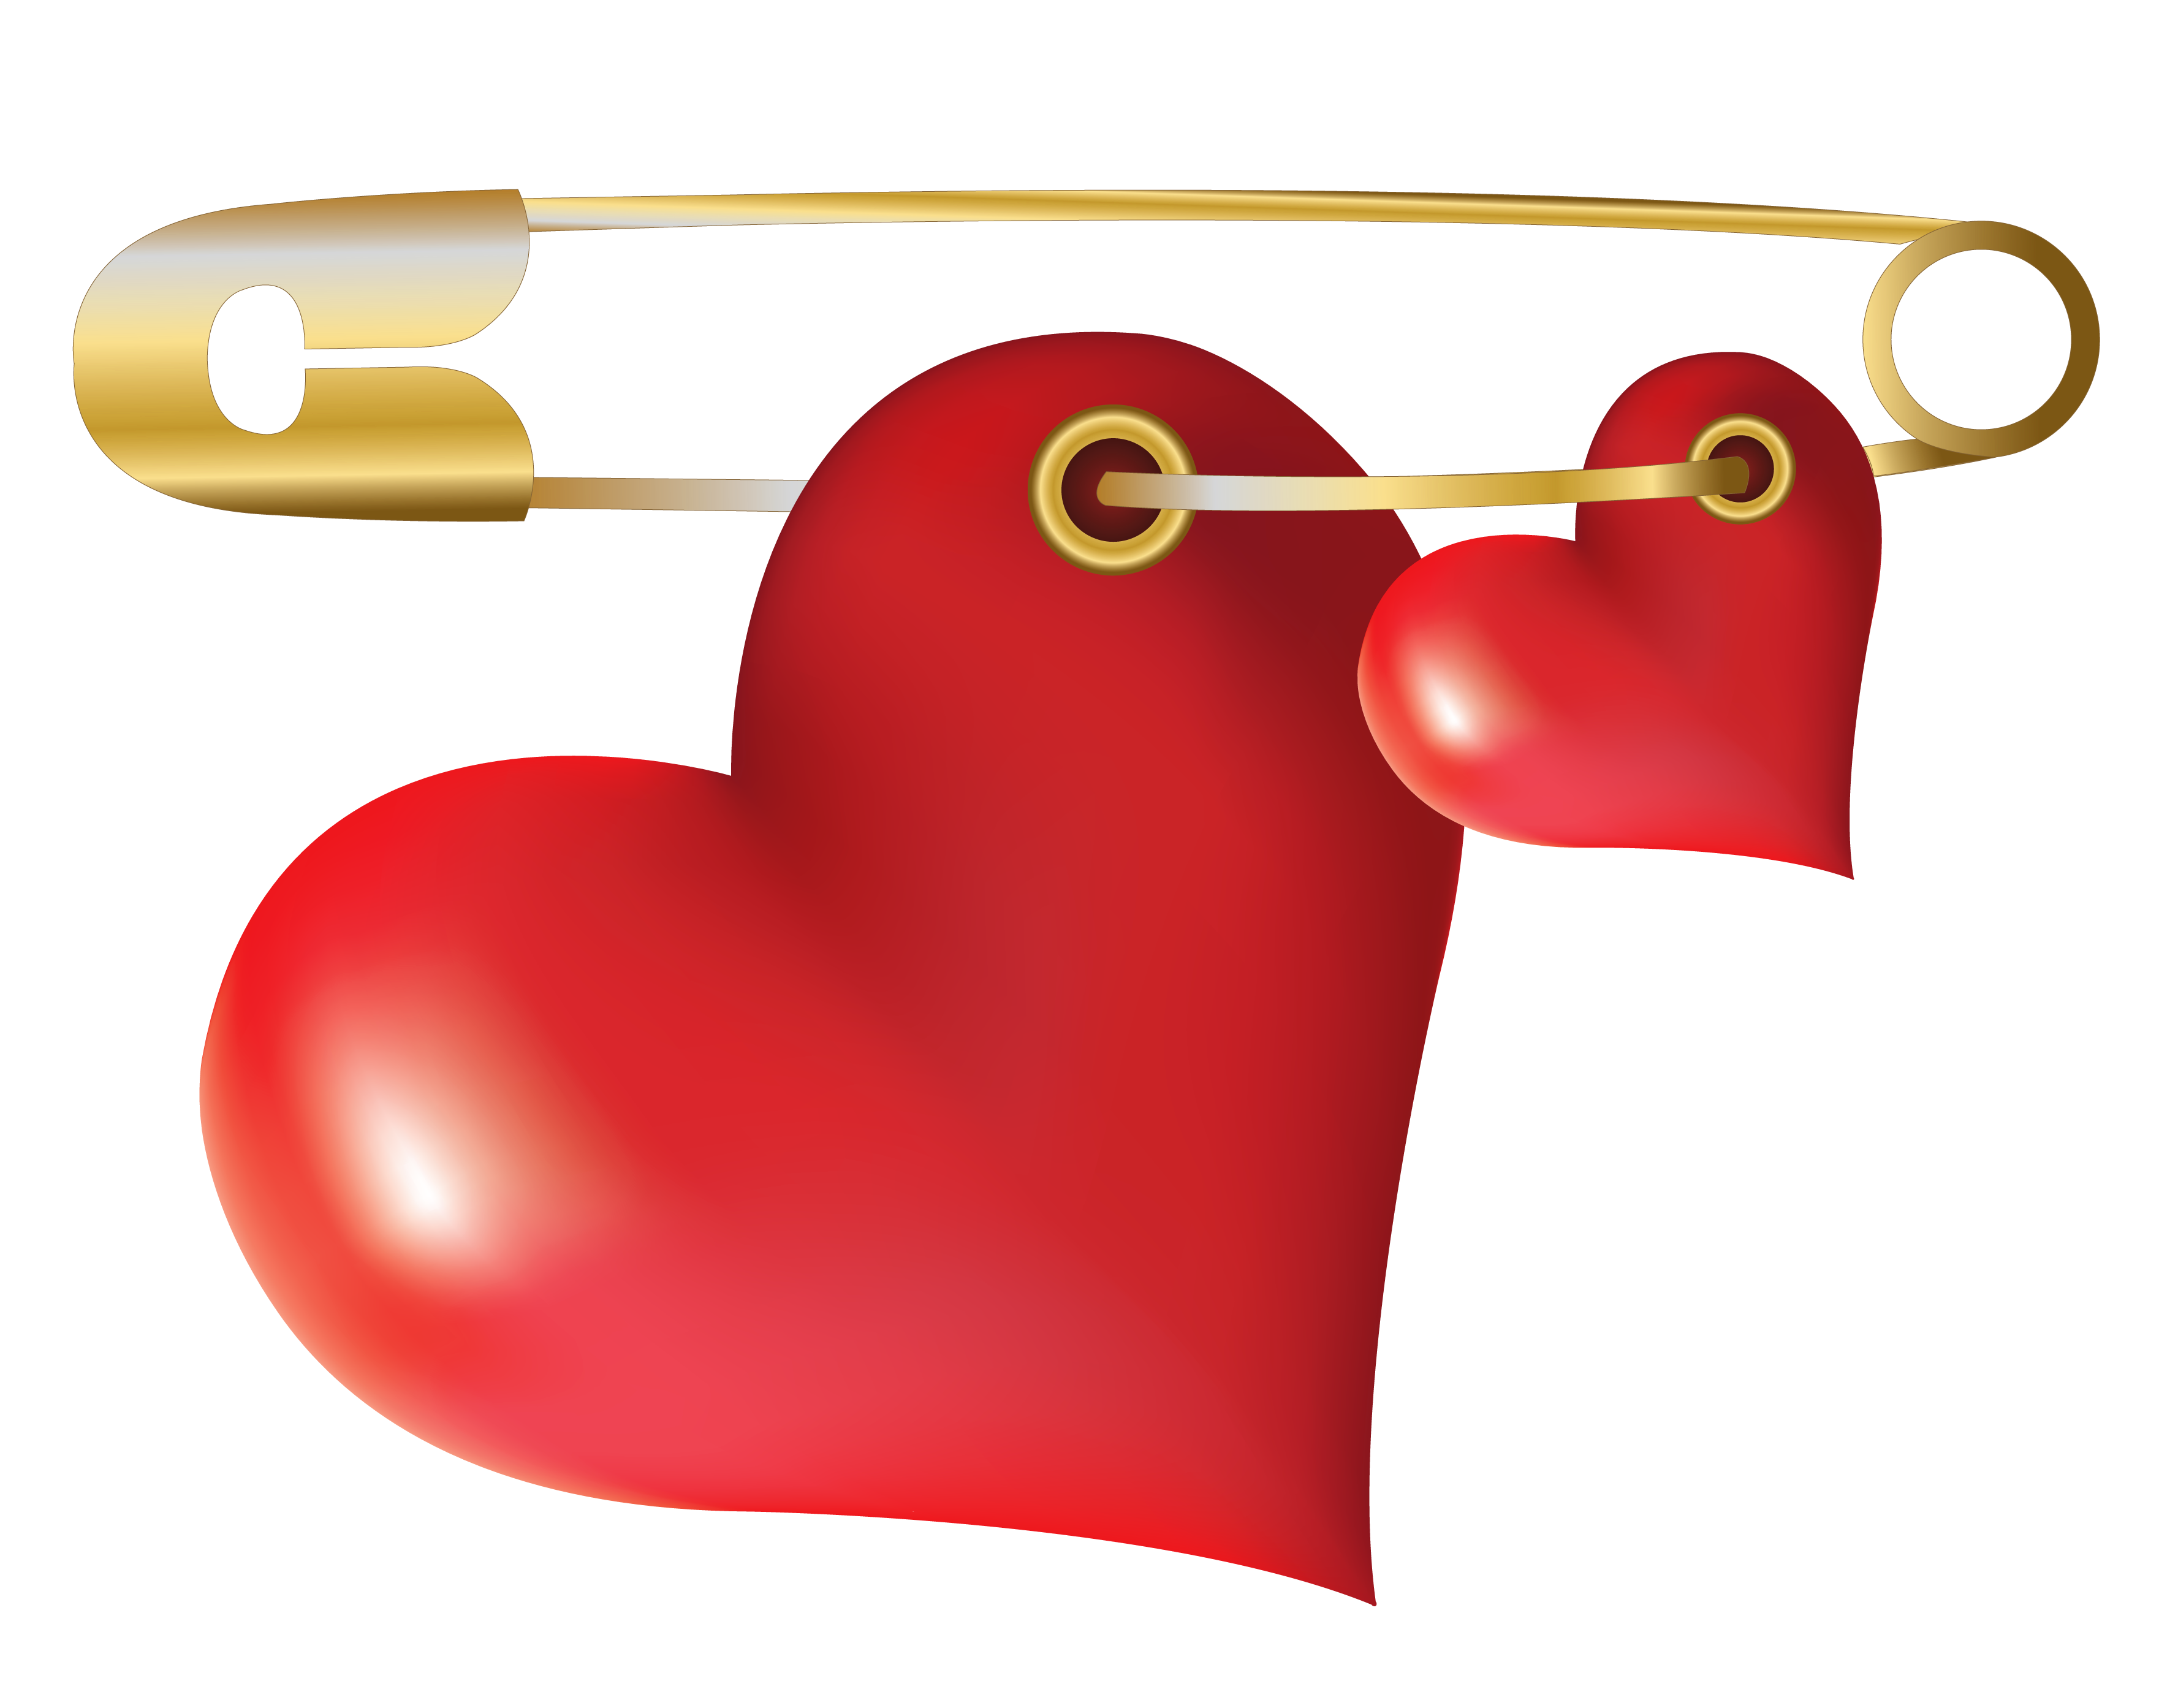 Hearts with Safety Pin PNG Clipart